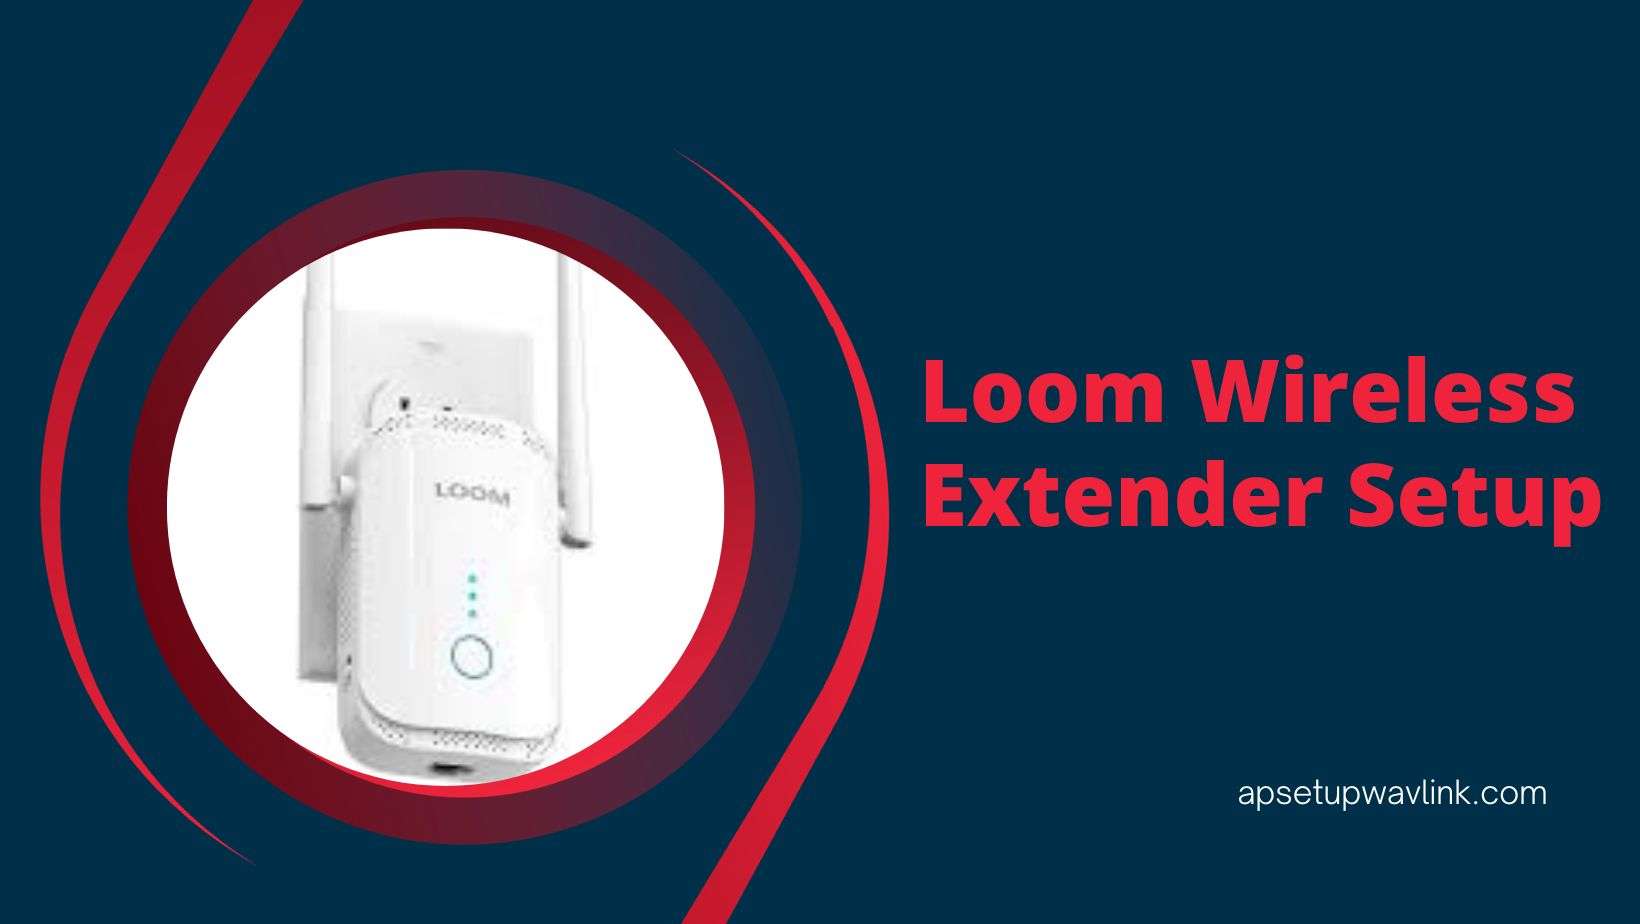 You are currently viewing Loom Wireless Extender Setup